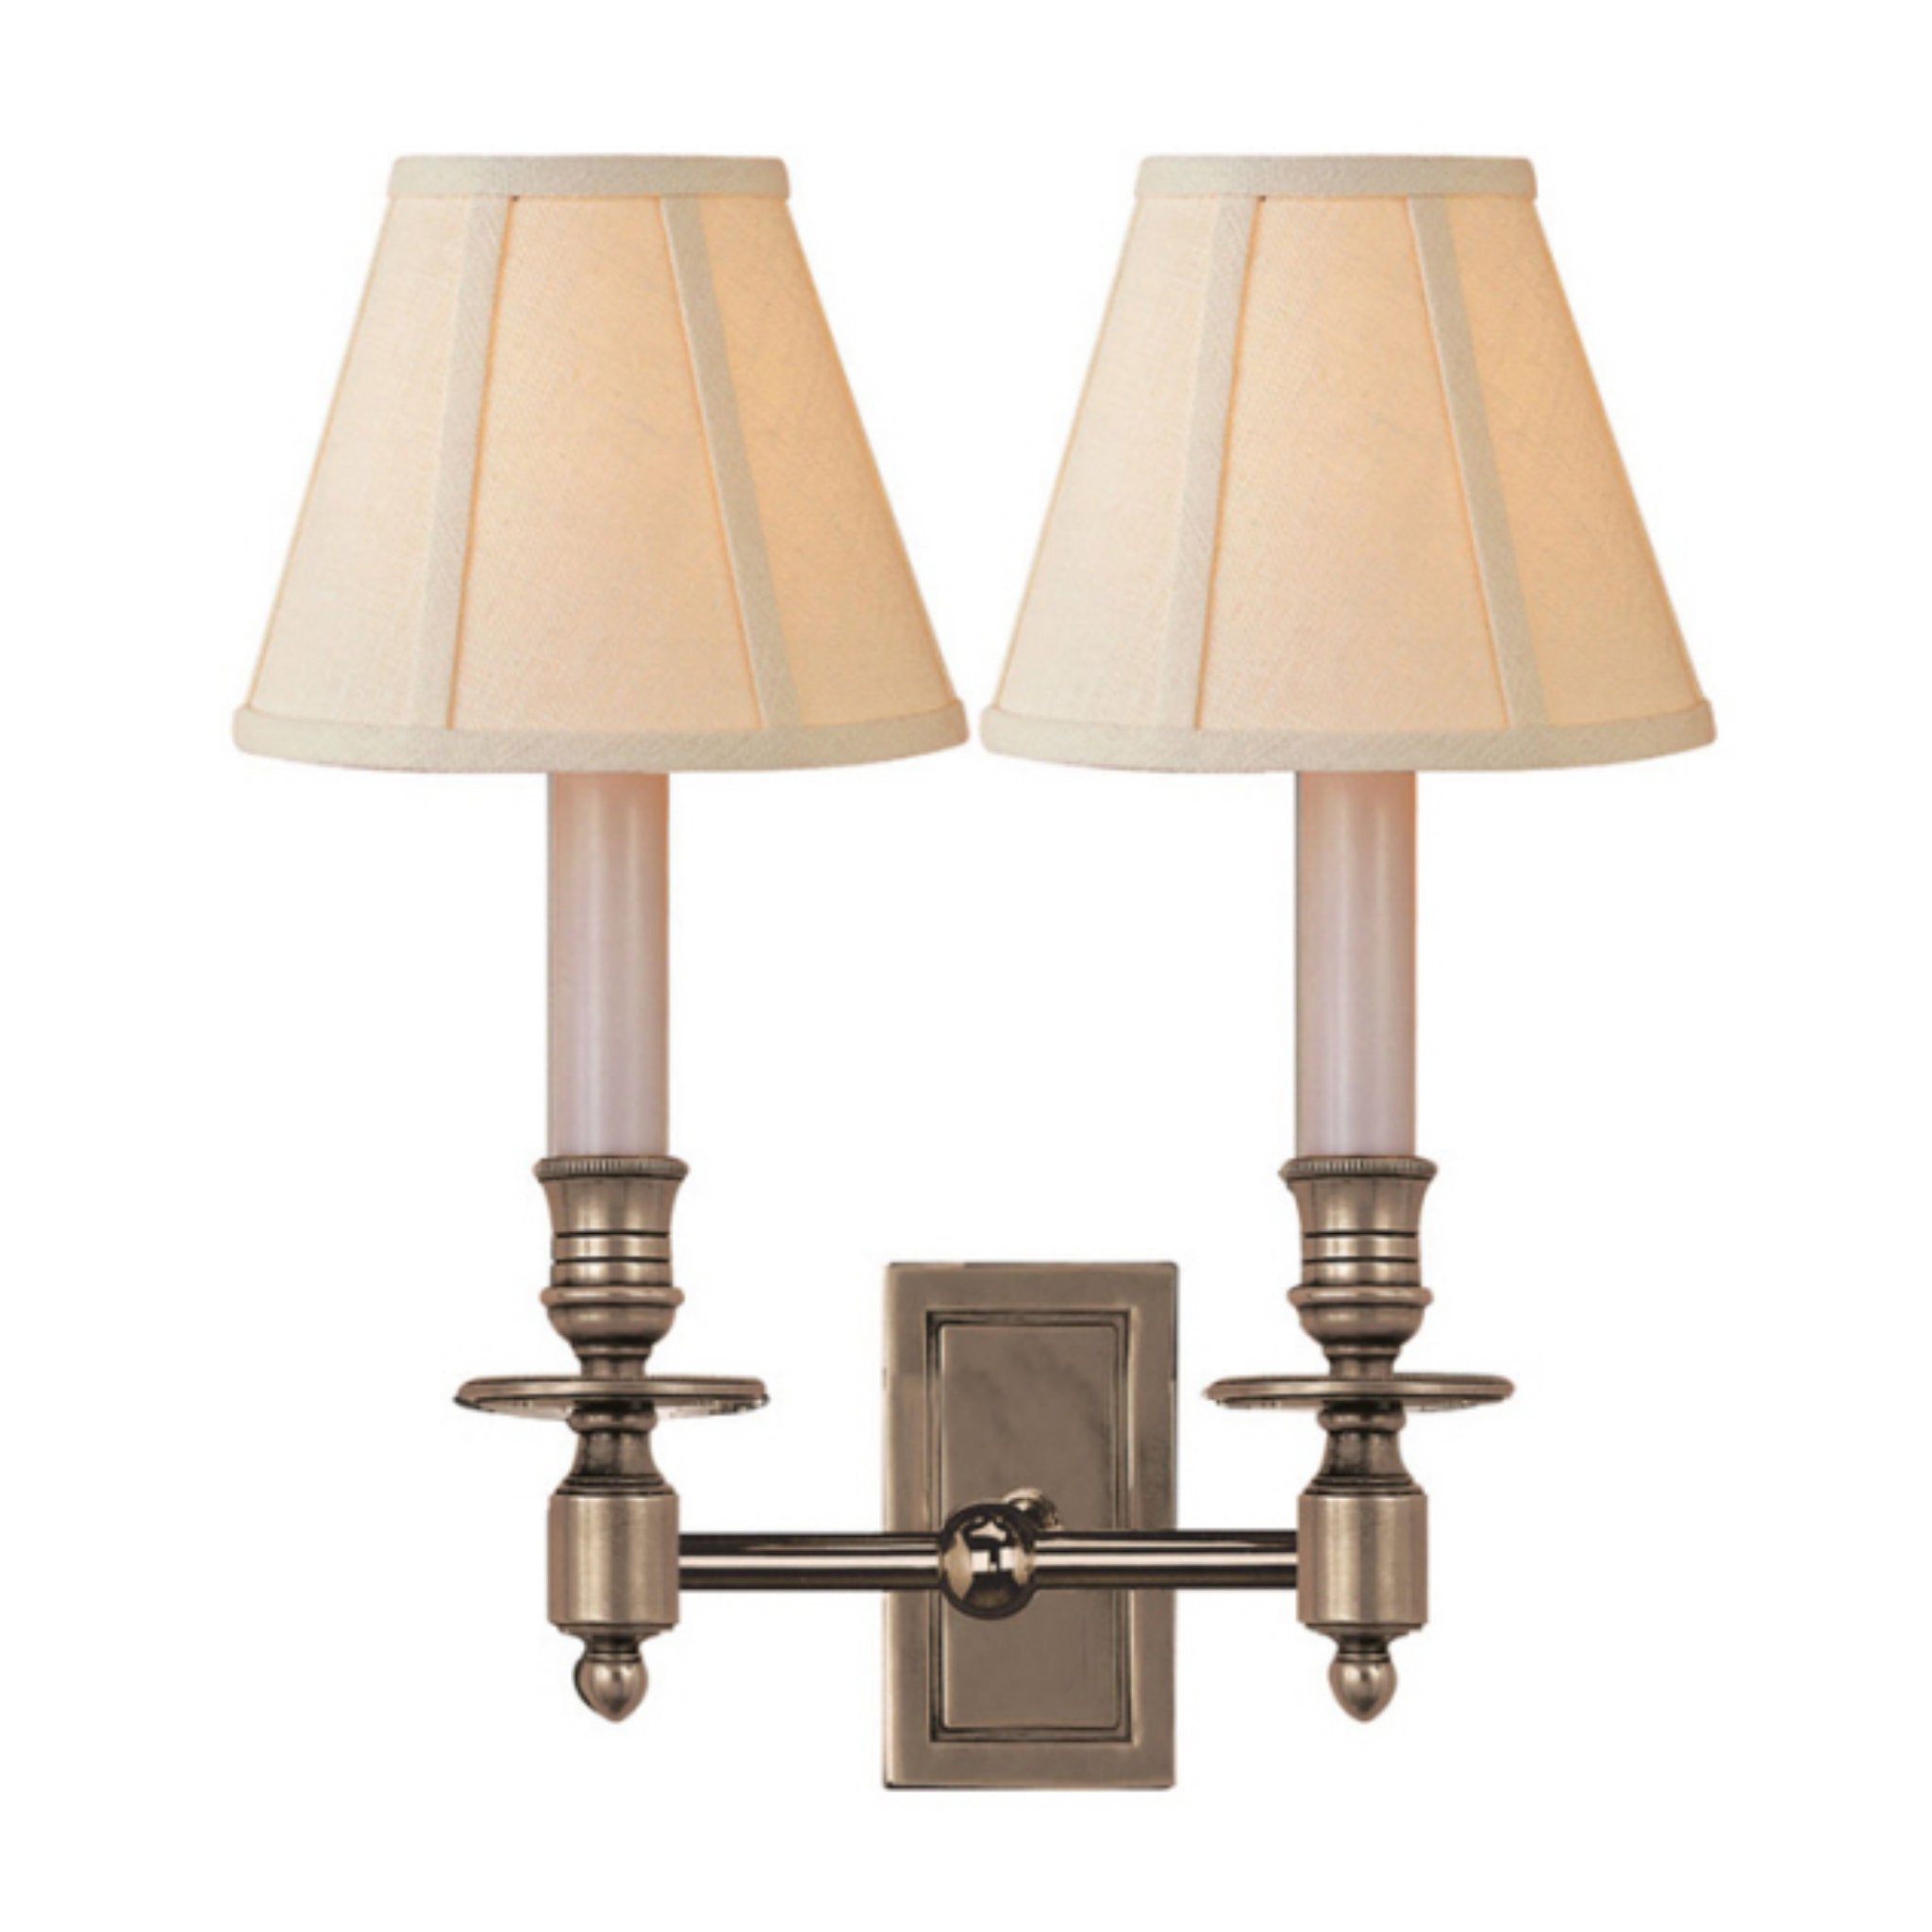 Visual Comfort French Double Library Sconce in Antique Nickel with Linen Shades